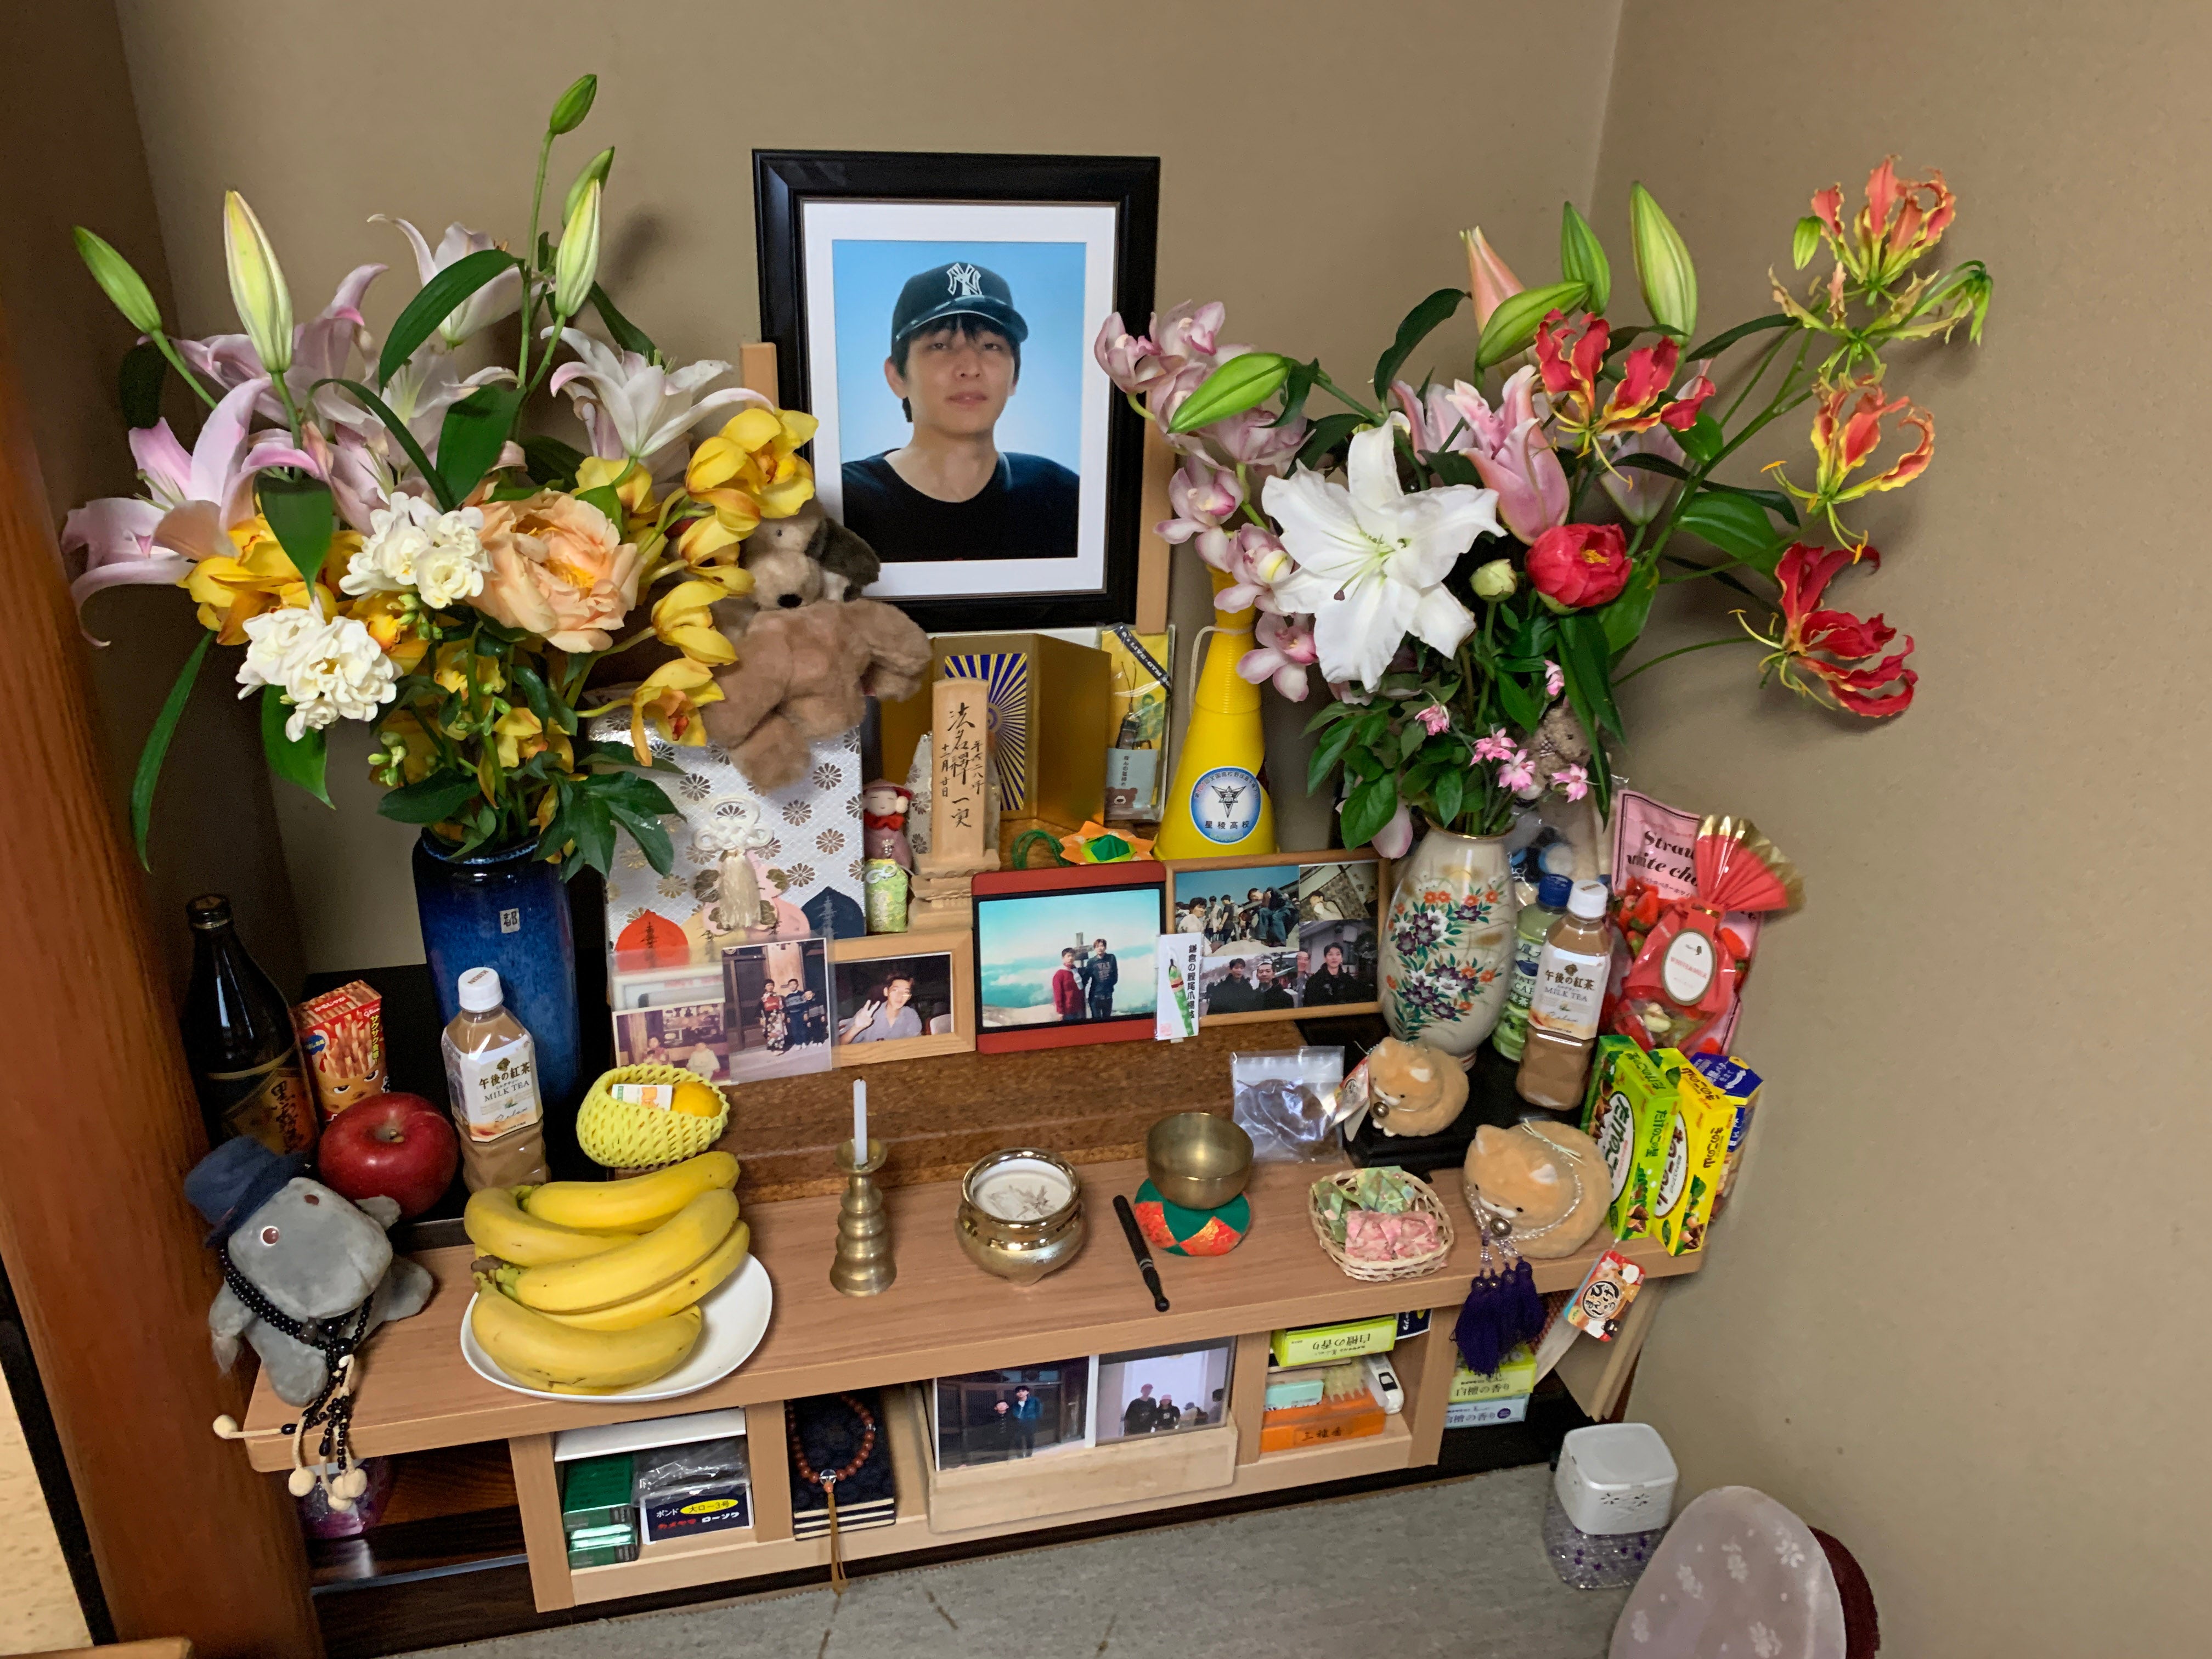 A shrine to Kazuya Ohata at his parents’ home in Kanazawa, Japan. He died at age 40 after being physically restrained in a psychiatric institution